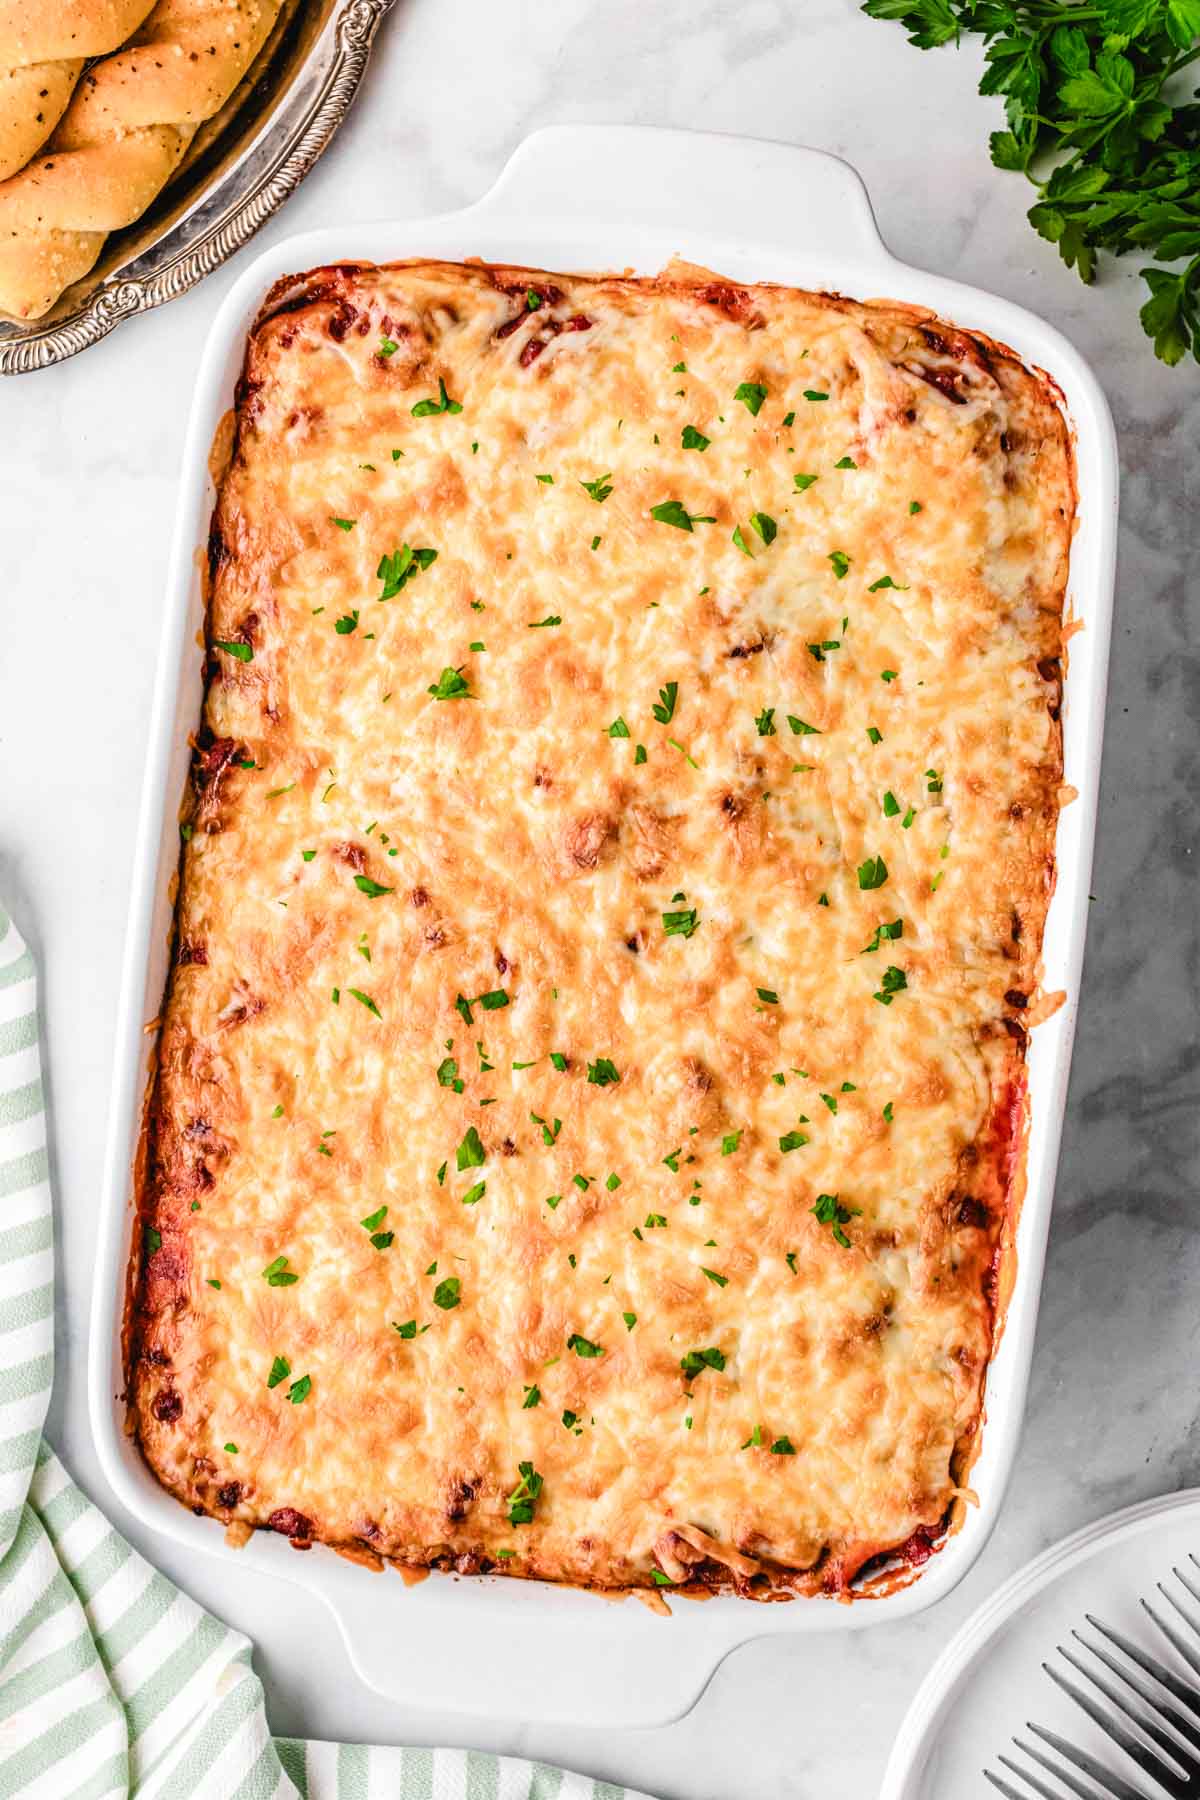 Baked spaghetti fresh out of the oven with melted gooey cheese on top.